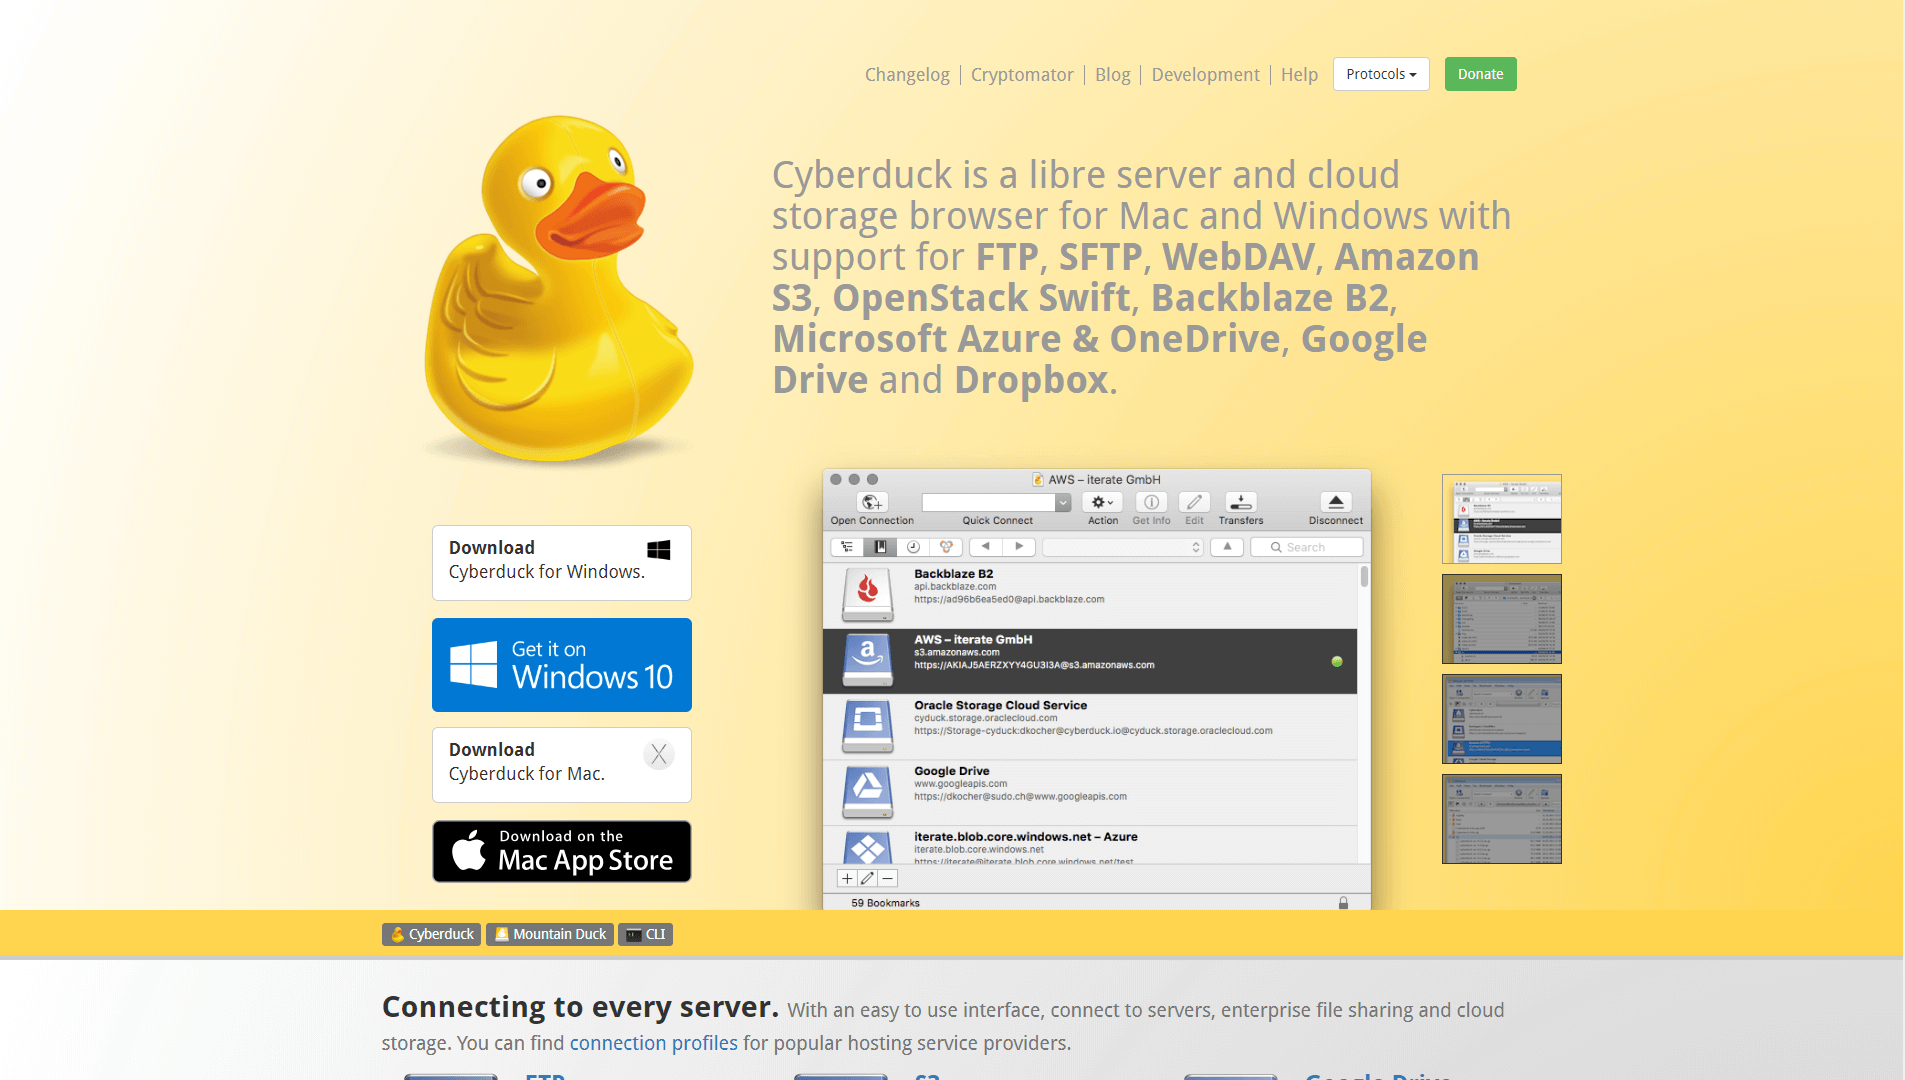 The Cyberduck homepage.